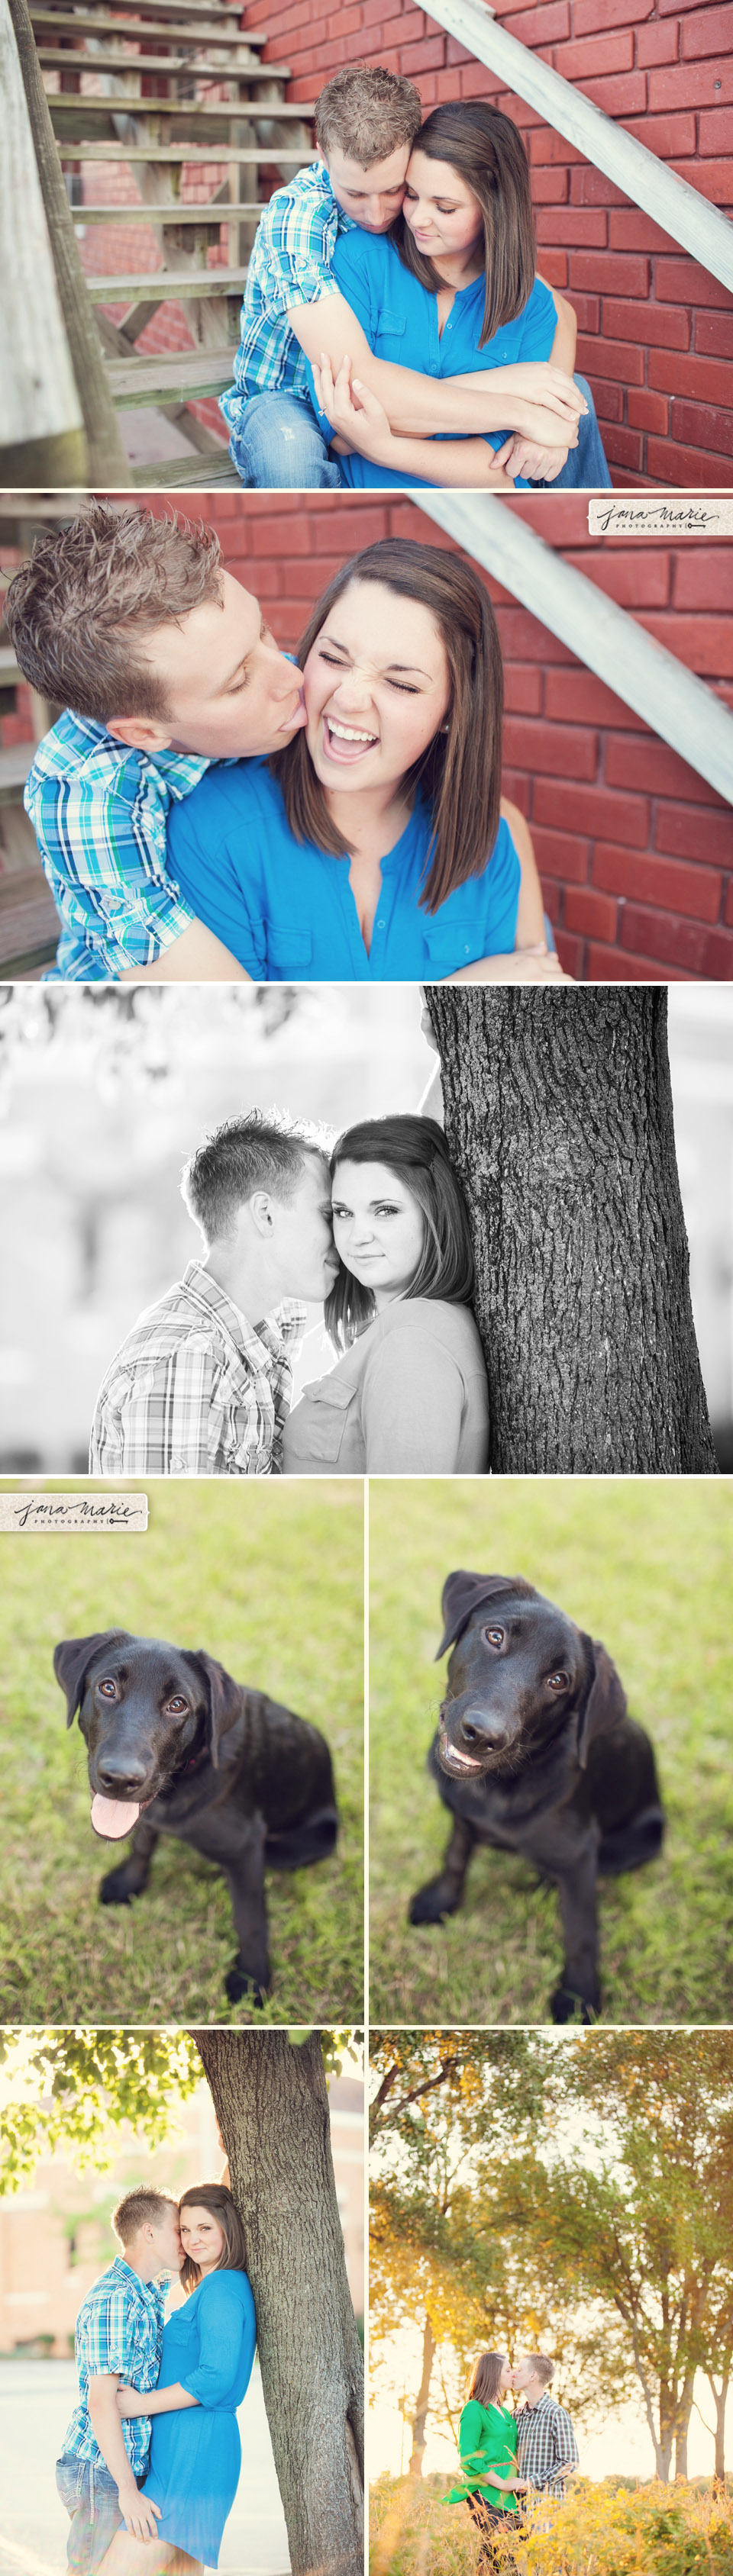 KC wedding photography, Jana Marie Photos, Beloved, sunset, puppies, Lab, red wall, outdoor sessions, fun, railroad